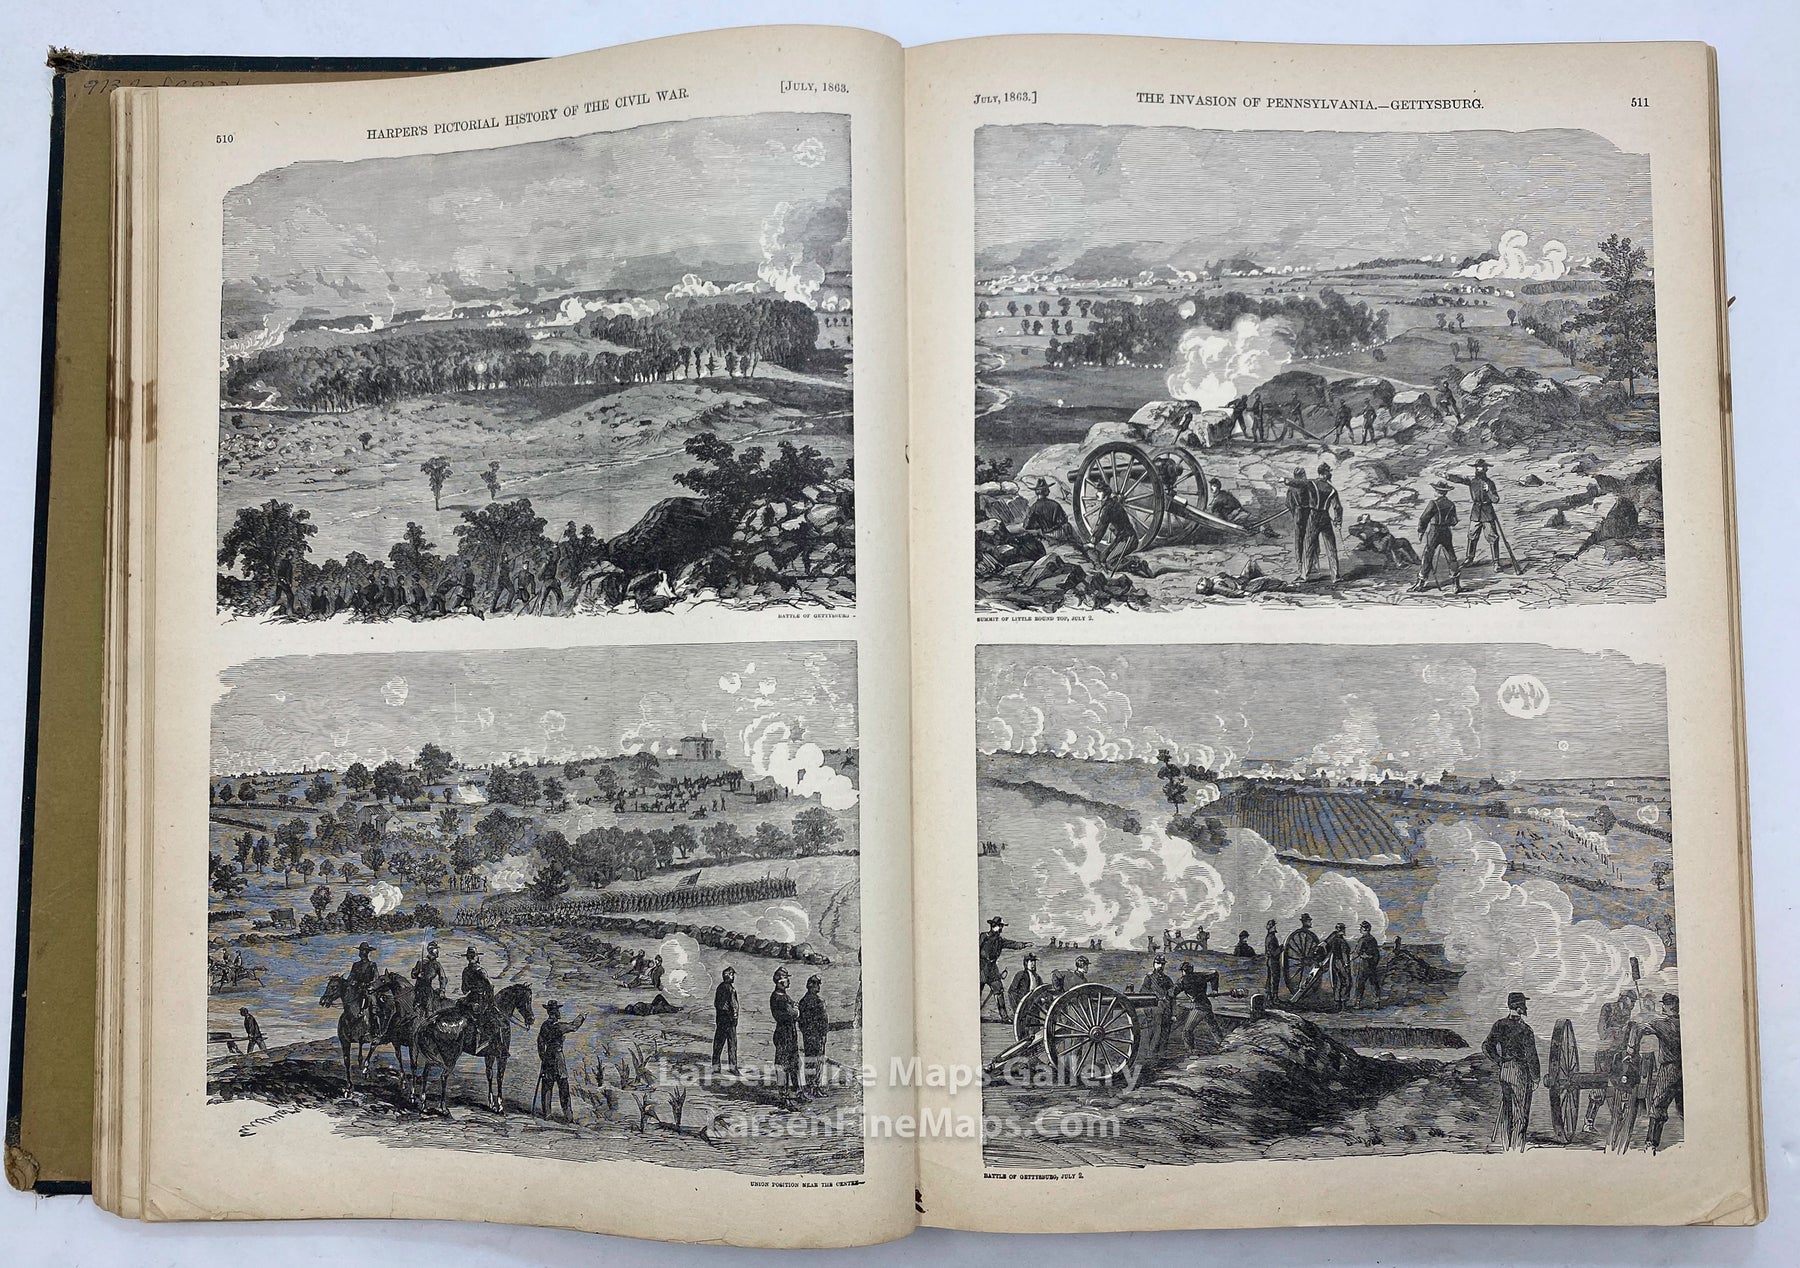 Harper's Pictorial History of The Civil War